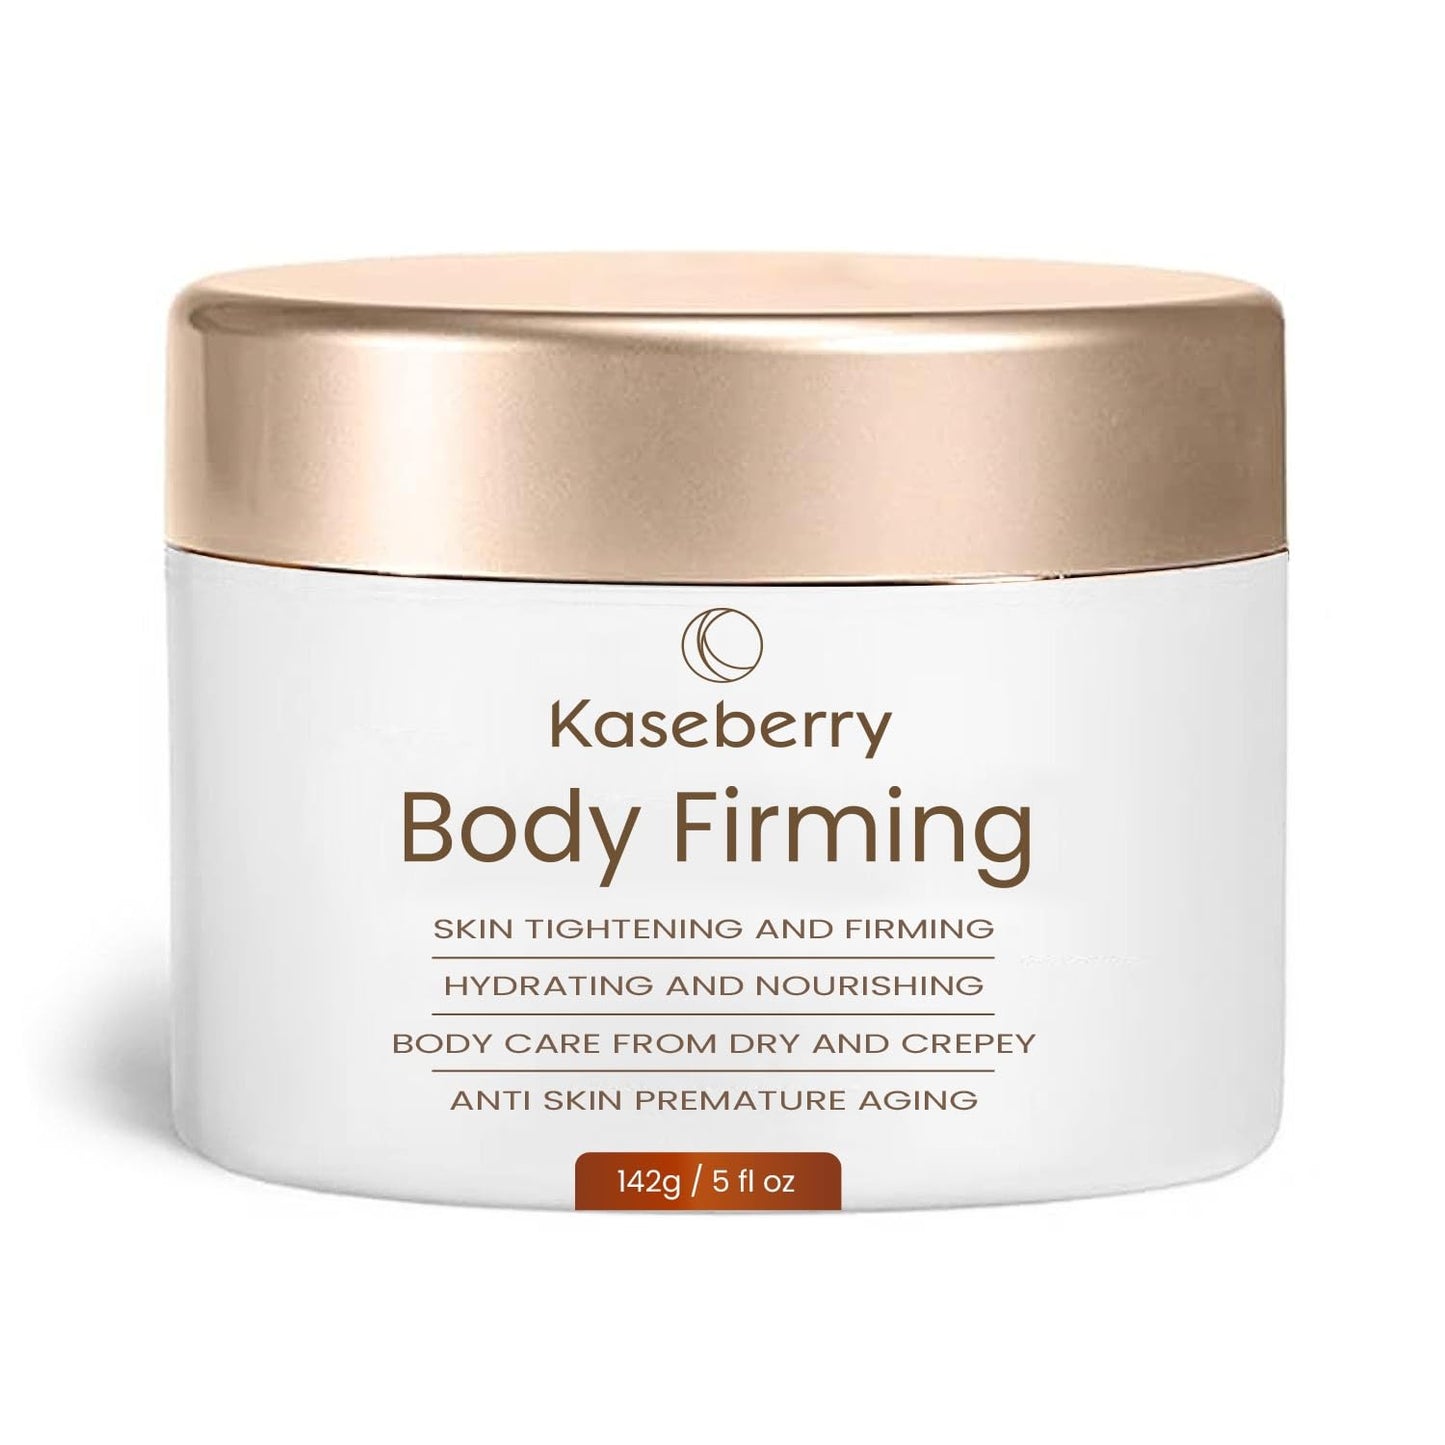 Moisturizing Body Repair Treatment: Reduce Crepey Skin and Wrinkle Visibly - Hydrating, Firming, Softening, Smooth Anti-Aging Cream For Body with Collagen and Elastin - 5 fl oz